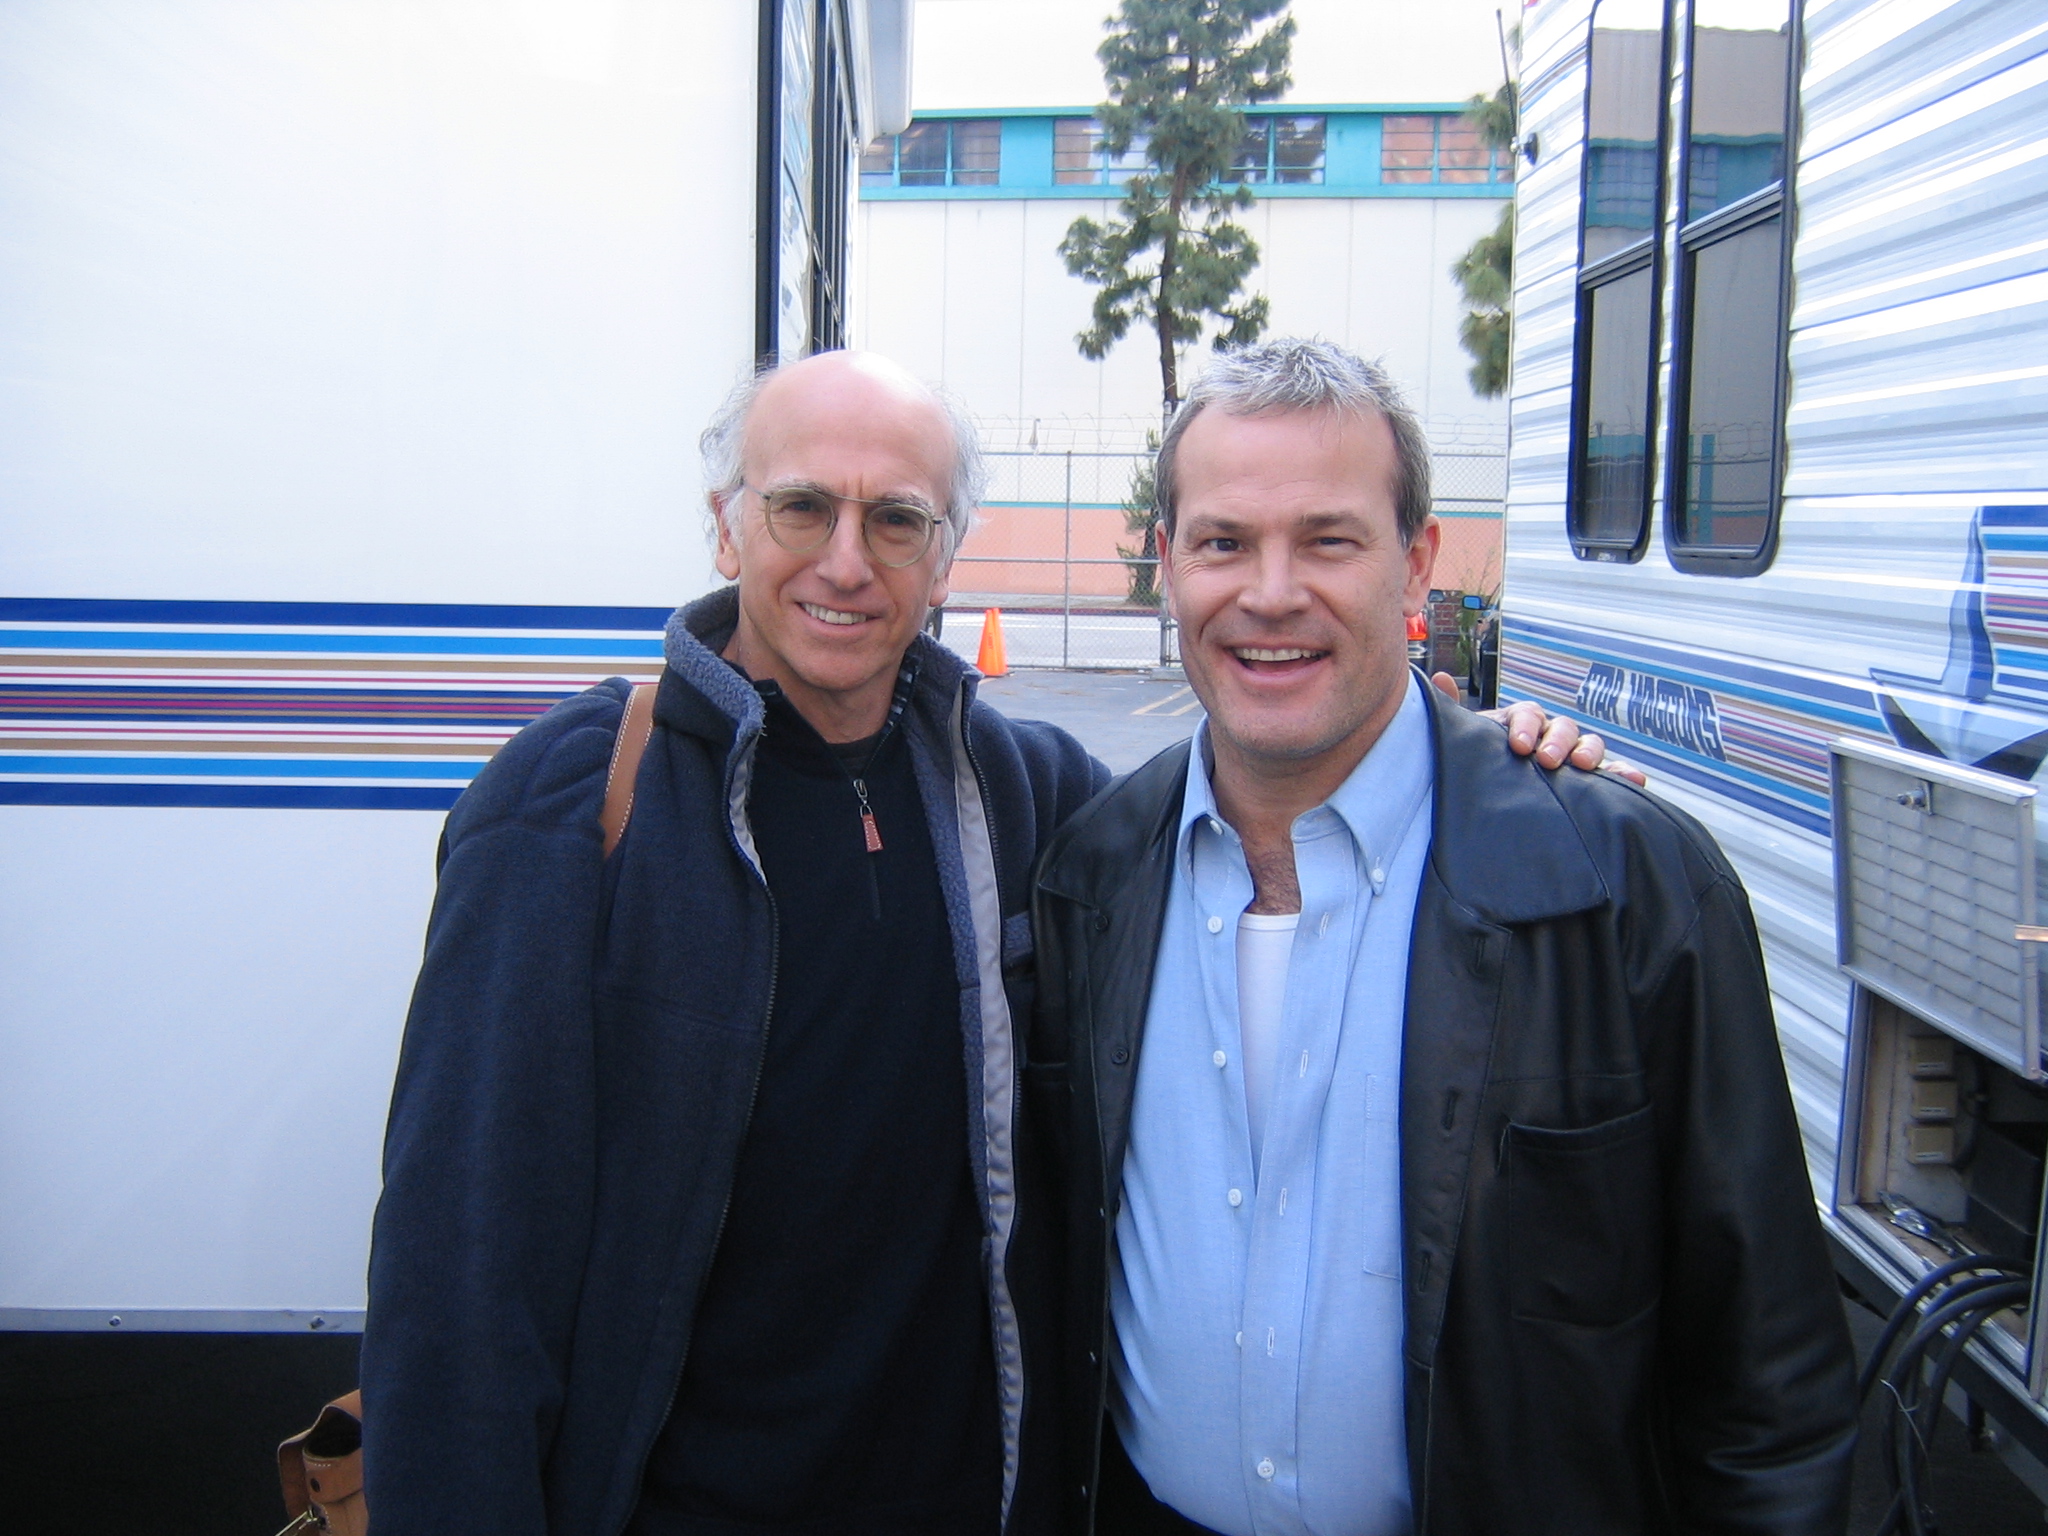 On set of Curb Your Enthusiasm.